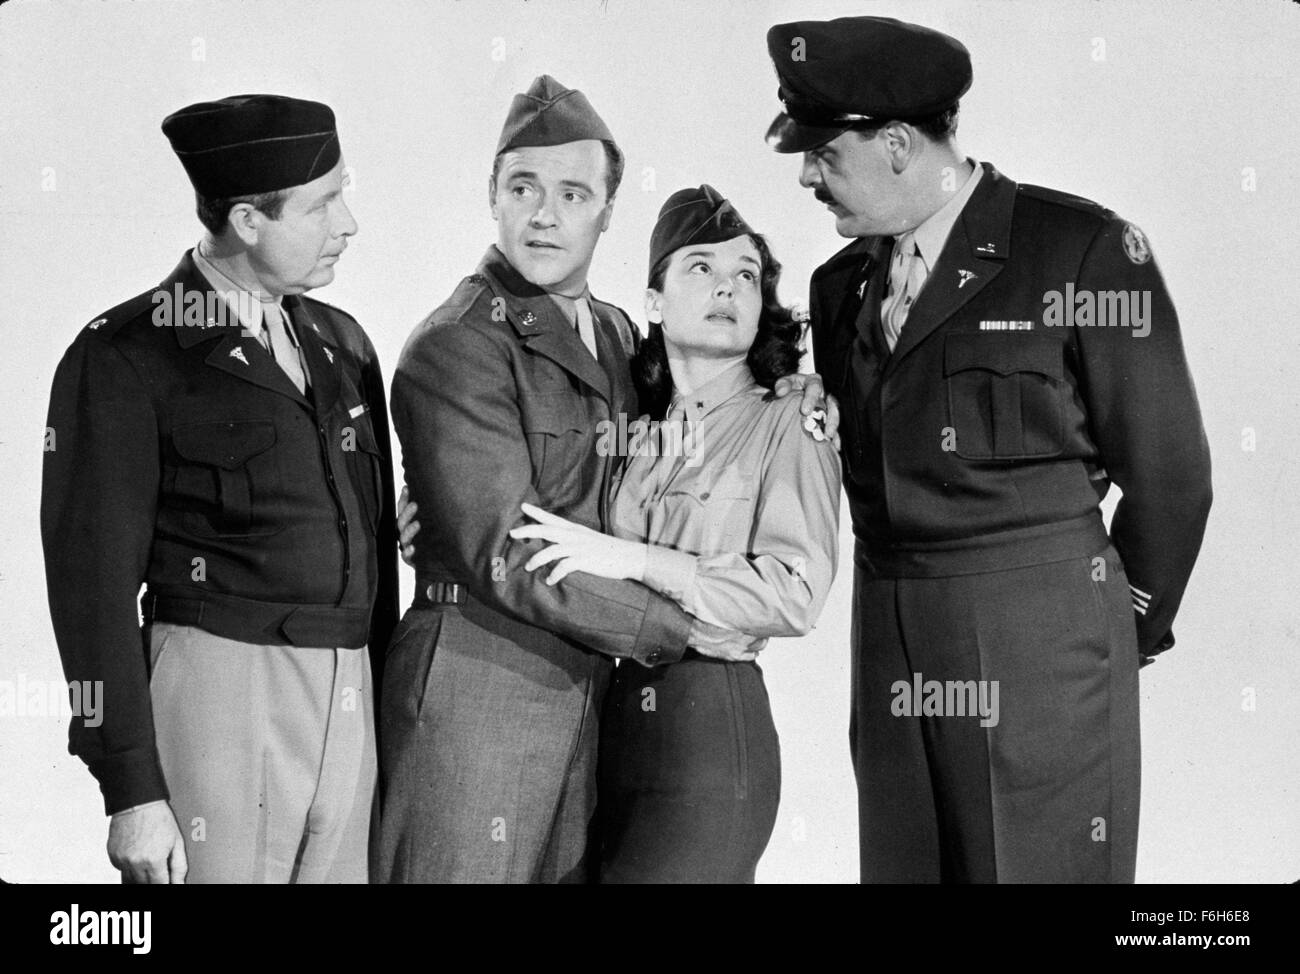 1957, Film Title: OPERATION MAD BALL, Director: RICHARD QUINE, Studio: COLUMBIA, Pictured: 1957, KATHRYN GRANT, ERNIE KOVACS, JACK LEMMON, ARTHUR O'CONNELL, LOVE - FORBIDDEN, CONTROVERSIAL, DISAPPROVAL, MILITARY, MILITARY UNIFORM, EMBRACE, CAUGHT, SHOCKED, SURPRISED, ROMANCE. (Credit Image: SNAP) Stock Photo